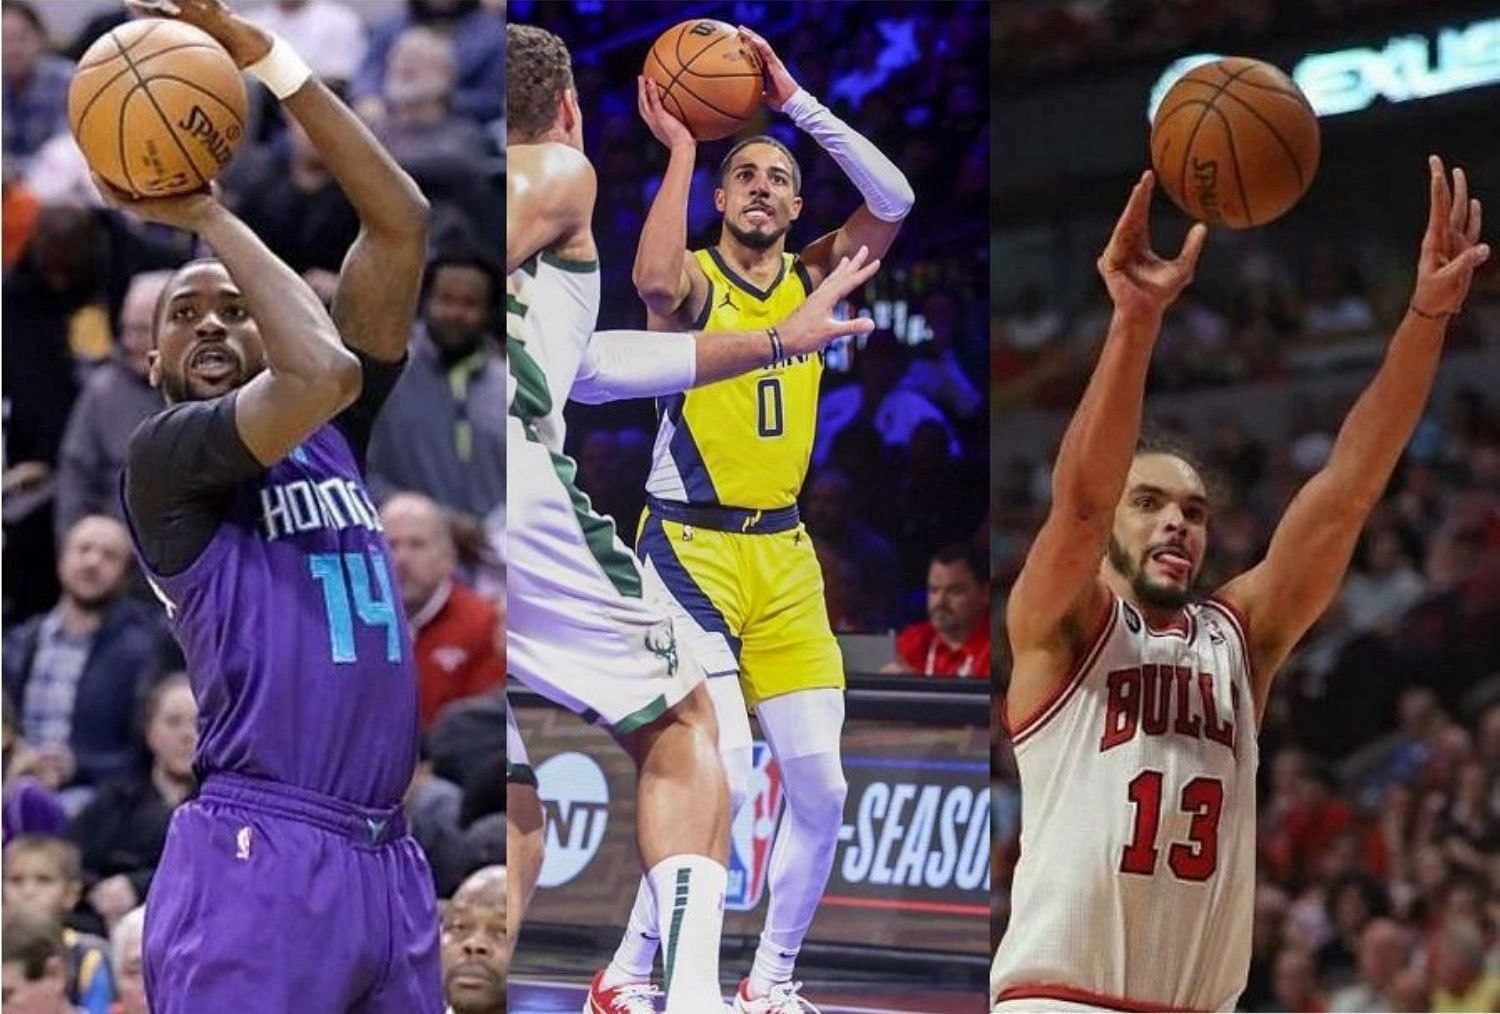 Michael Kidd-Gilchrist (L), Tyrese Haliburton (C) and Joakim Noah (R) are among the NBA players who have unconventional shooting forms.